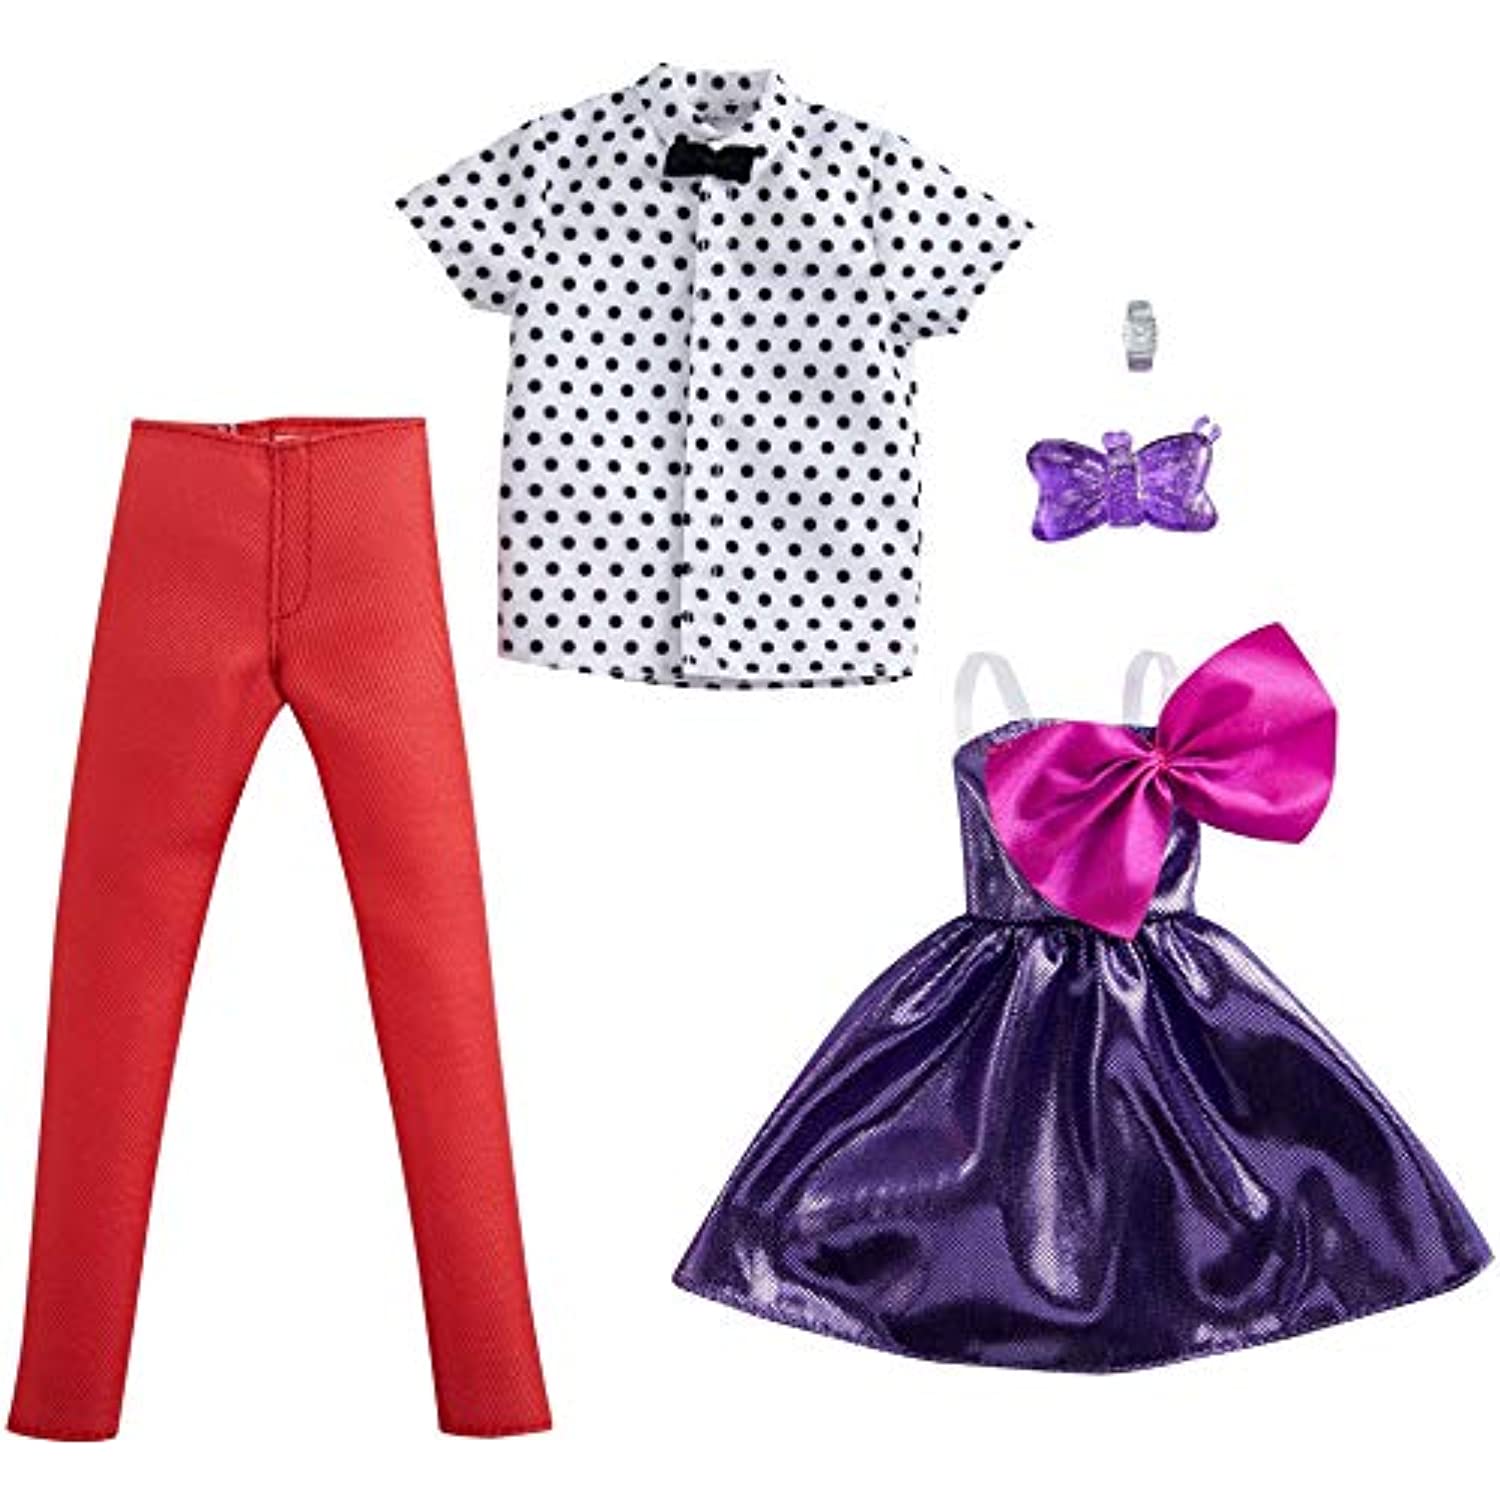 Barbie Fashion Pack with 1 Outfit 1 Accessory Doll, Purple Dress with Bow, 1 Each for Ken Doll, Polka Dot with Bow Tie, Gift for 3 to 8 Year Olds